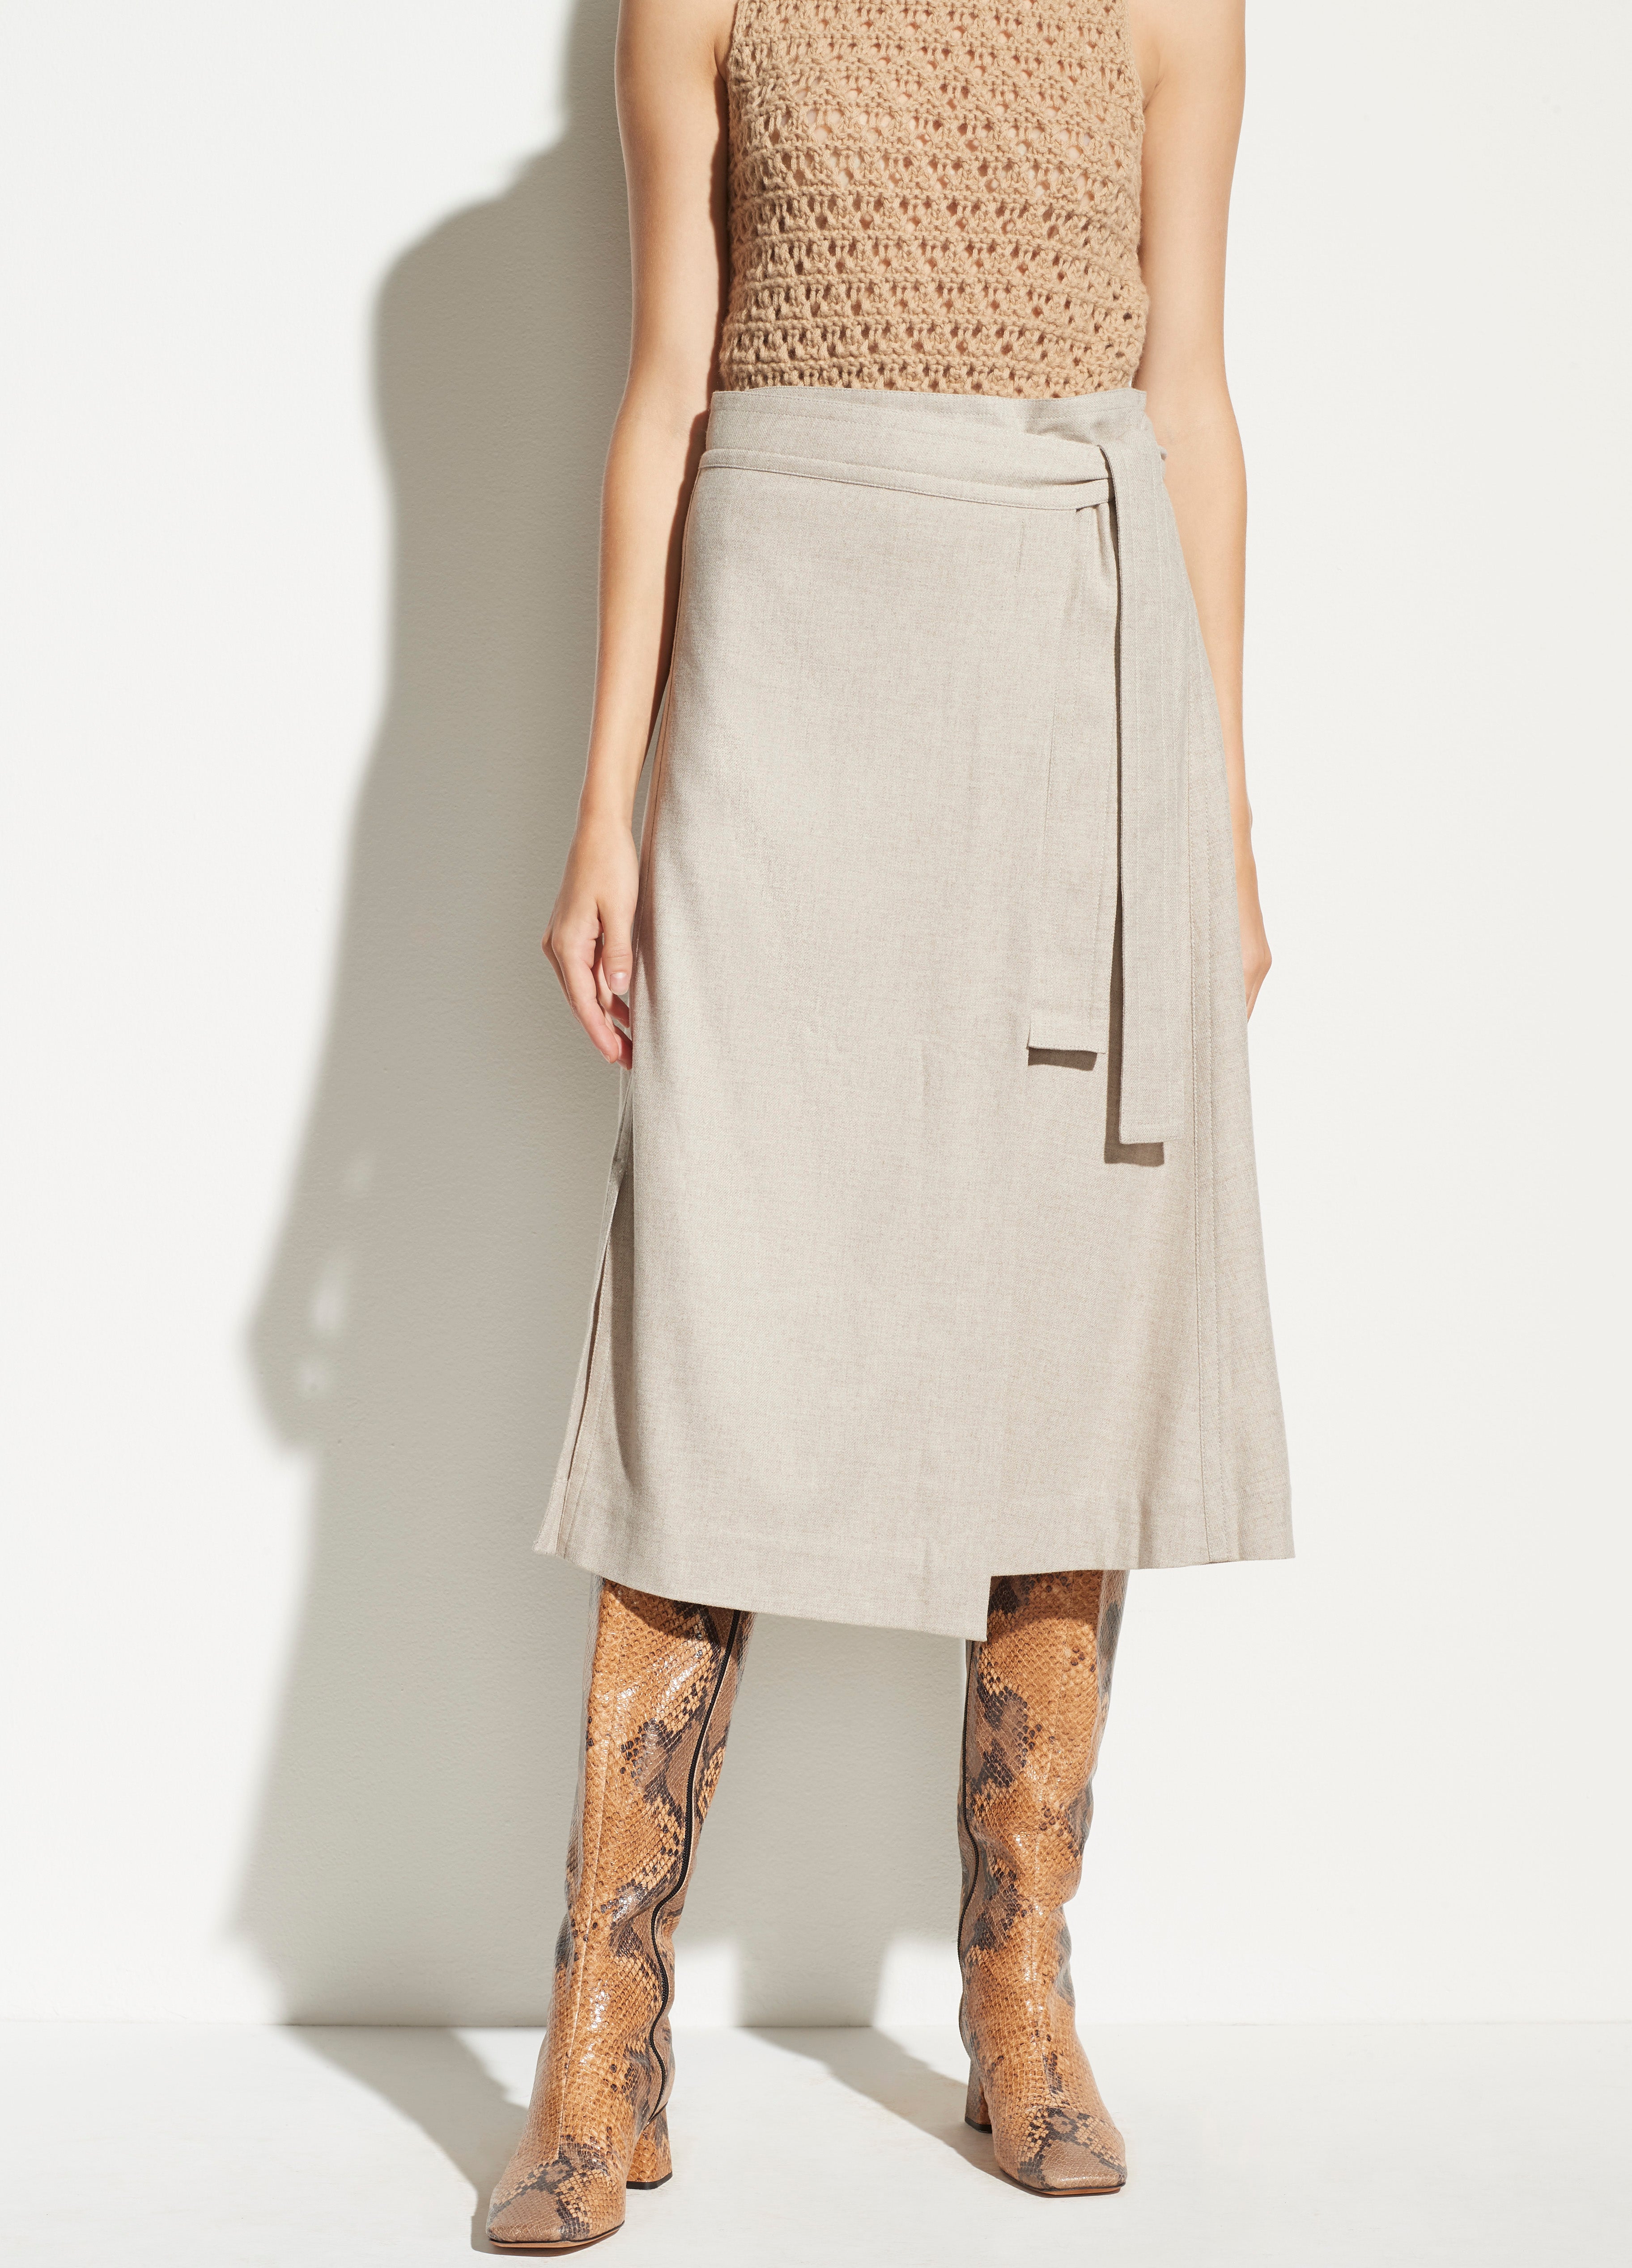 Vince, Belted Leather Skirt in Dark Wheat